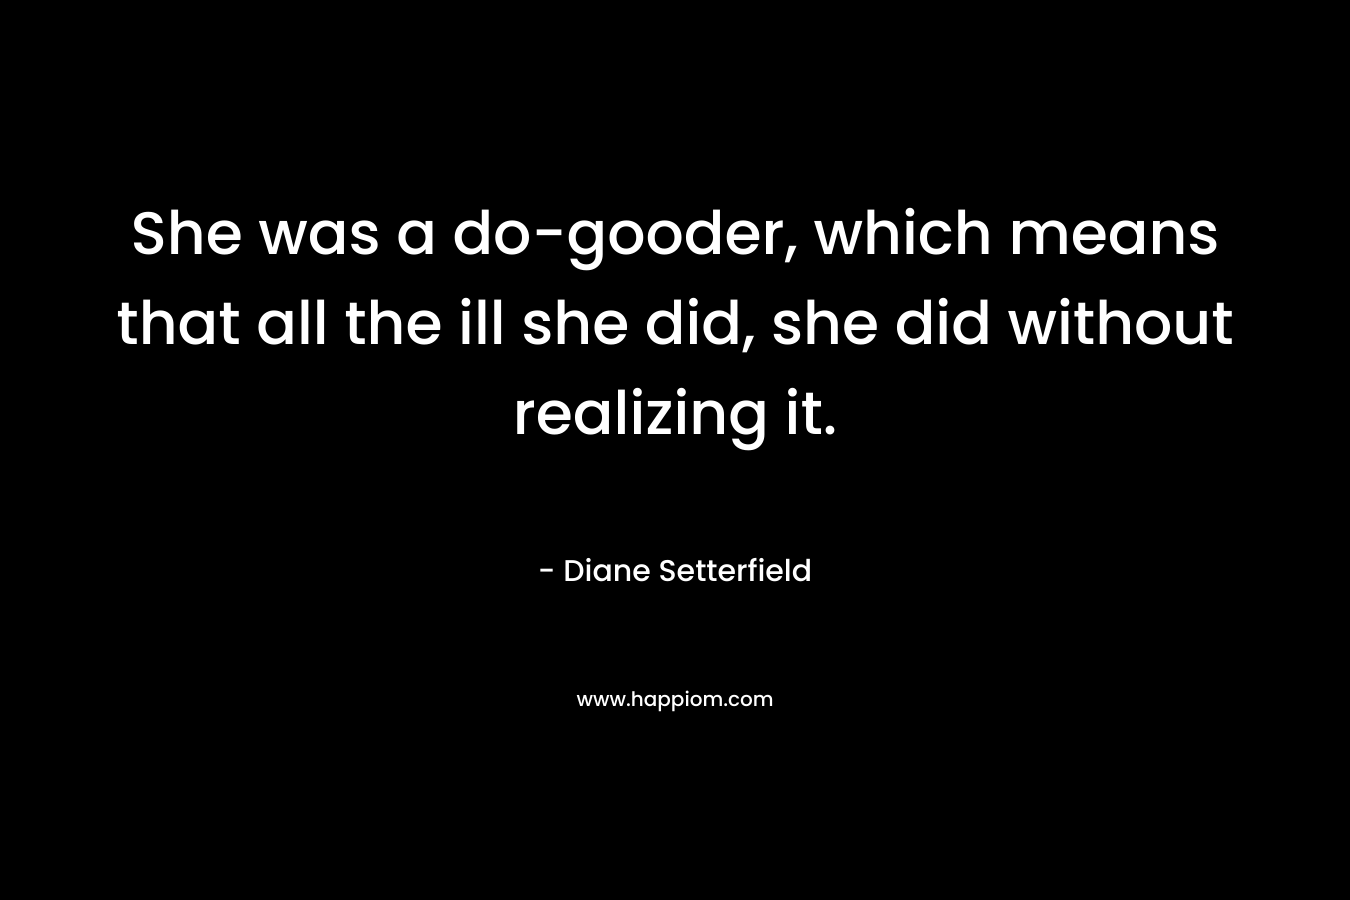 She was a do-gooder, which means that all the ill she did, she did without realizing it. – Diane Setterfield